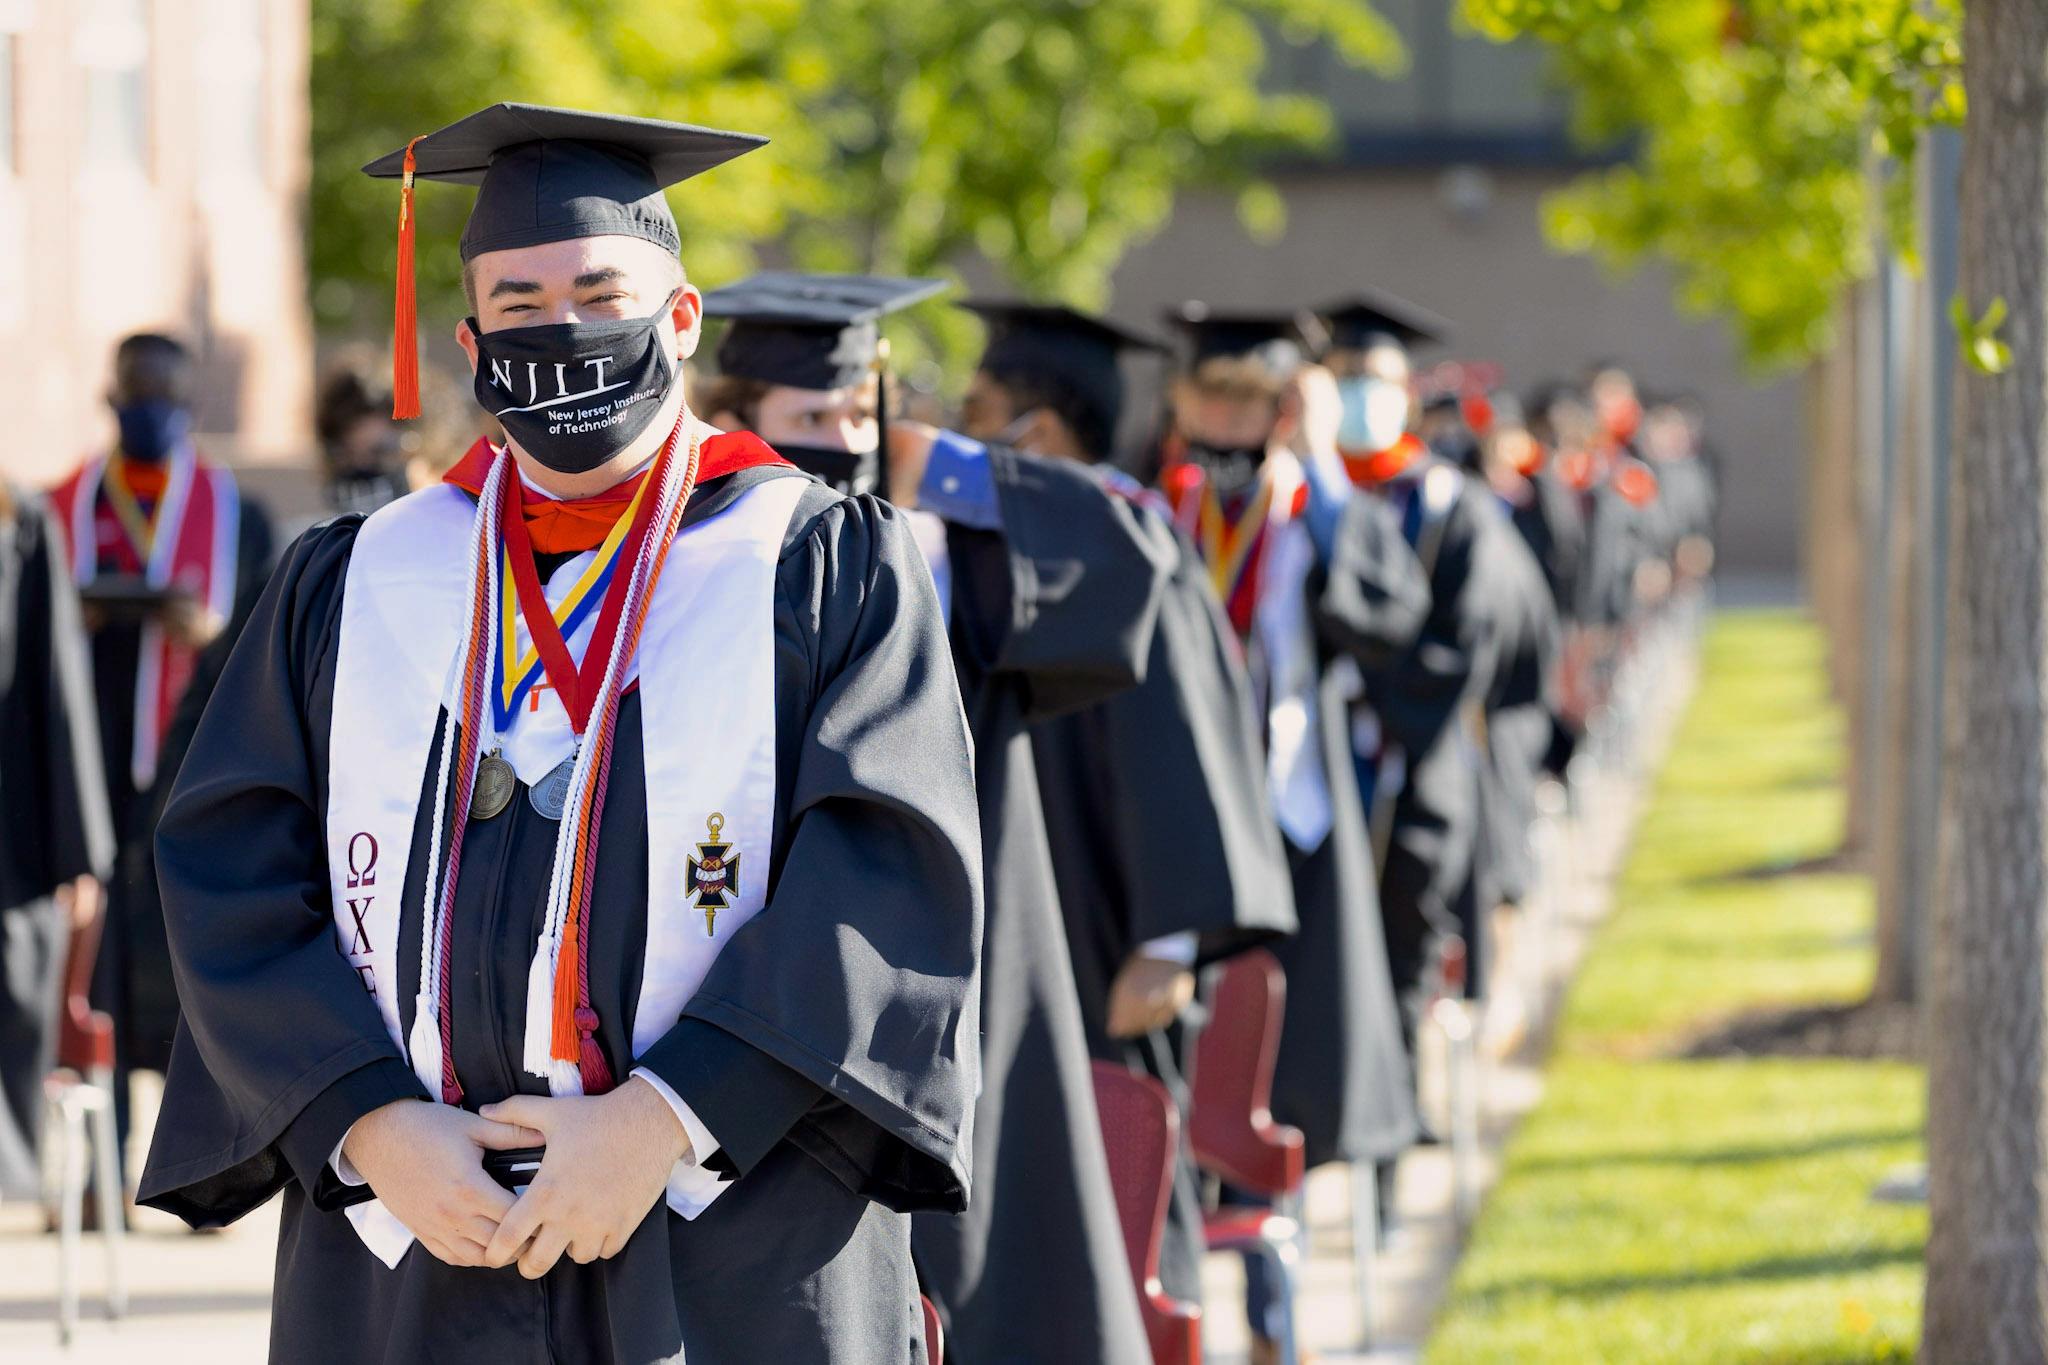 NJIT Graduates 3,000 Who Excelled Despite COVID19 Pandemic